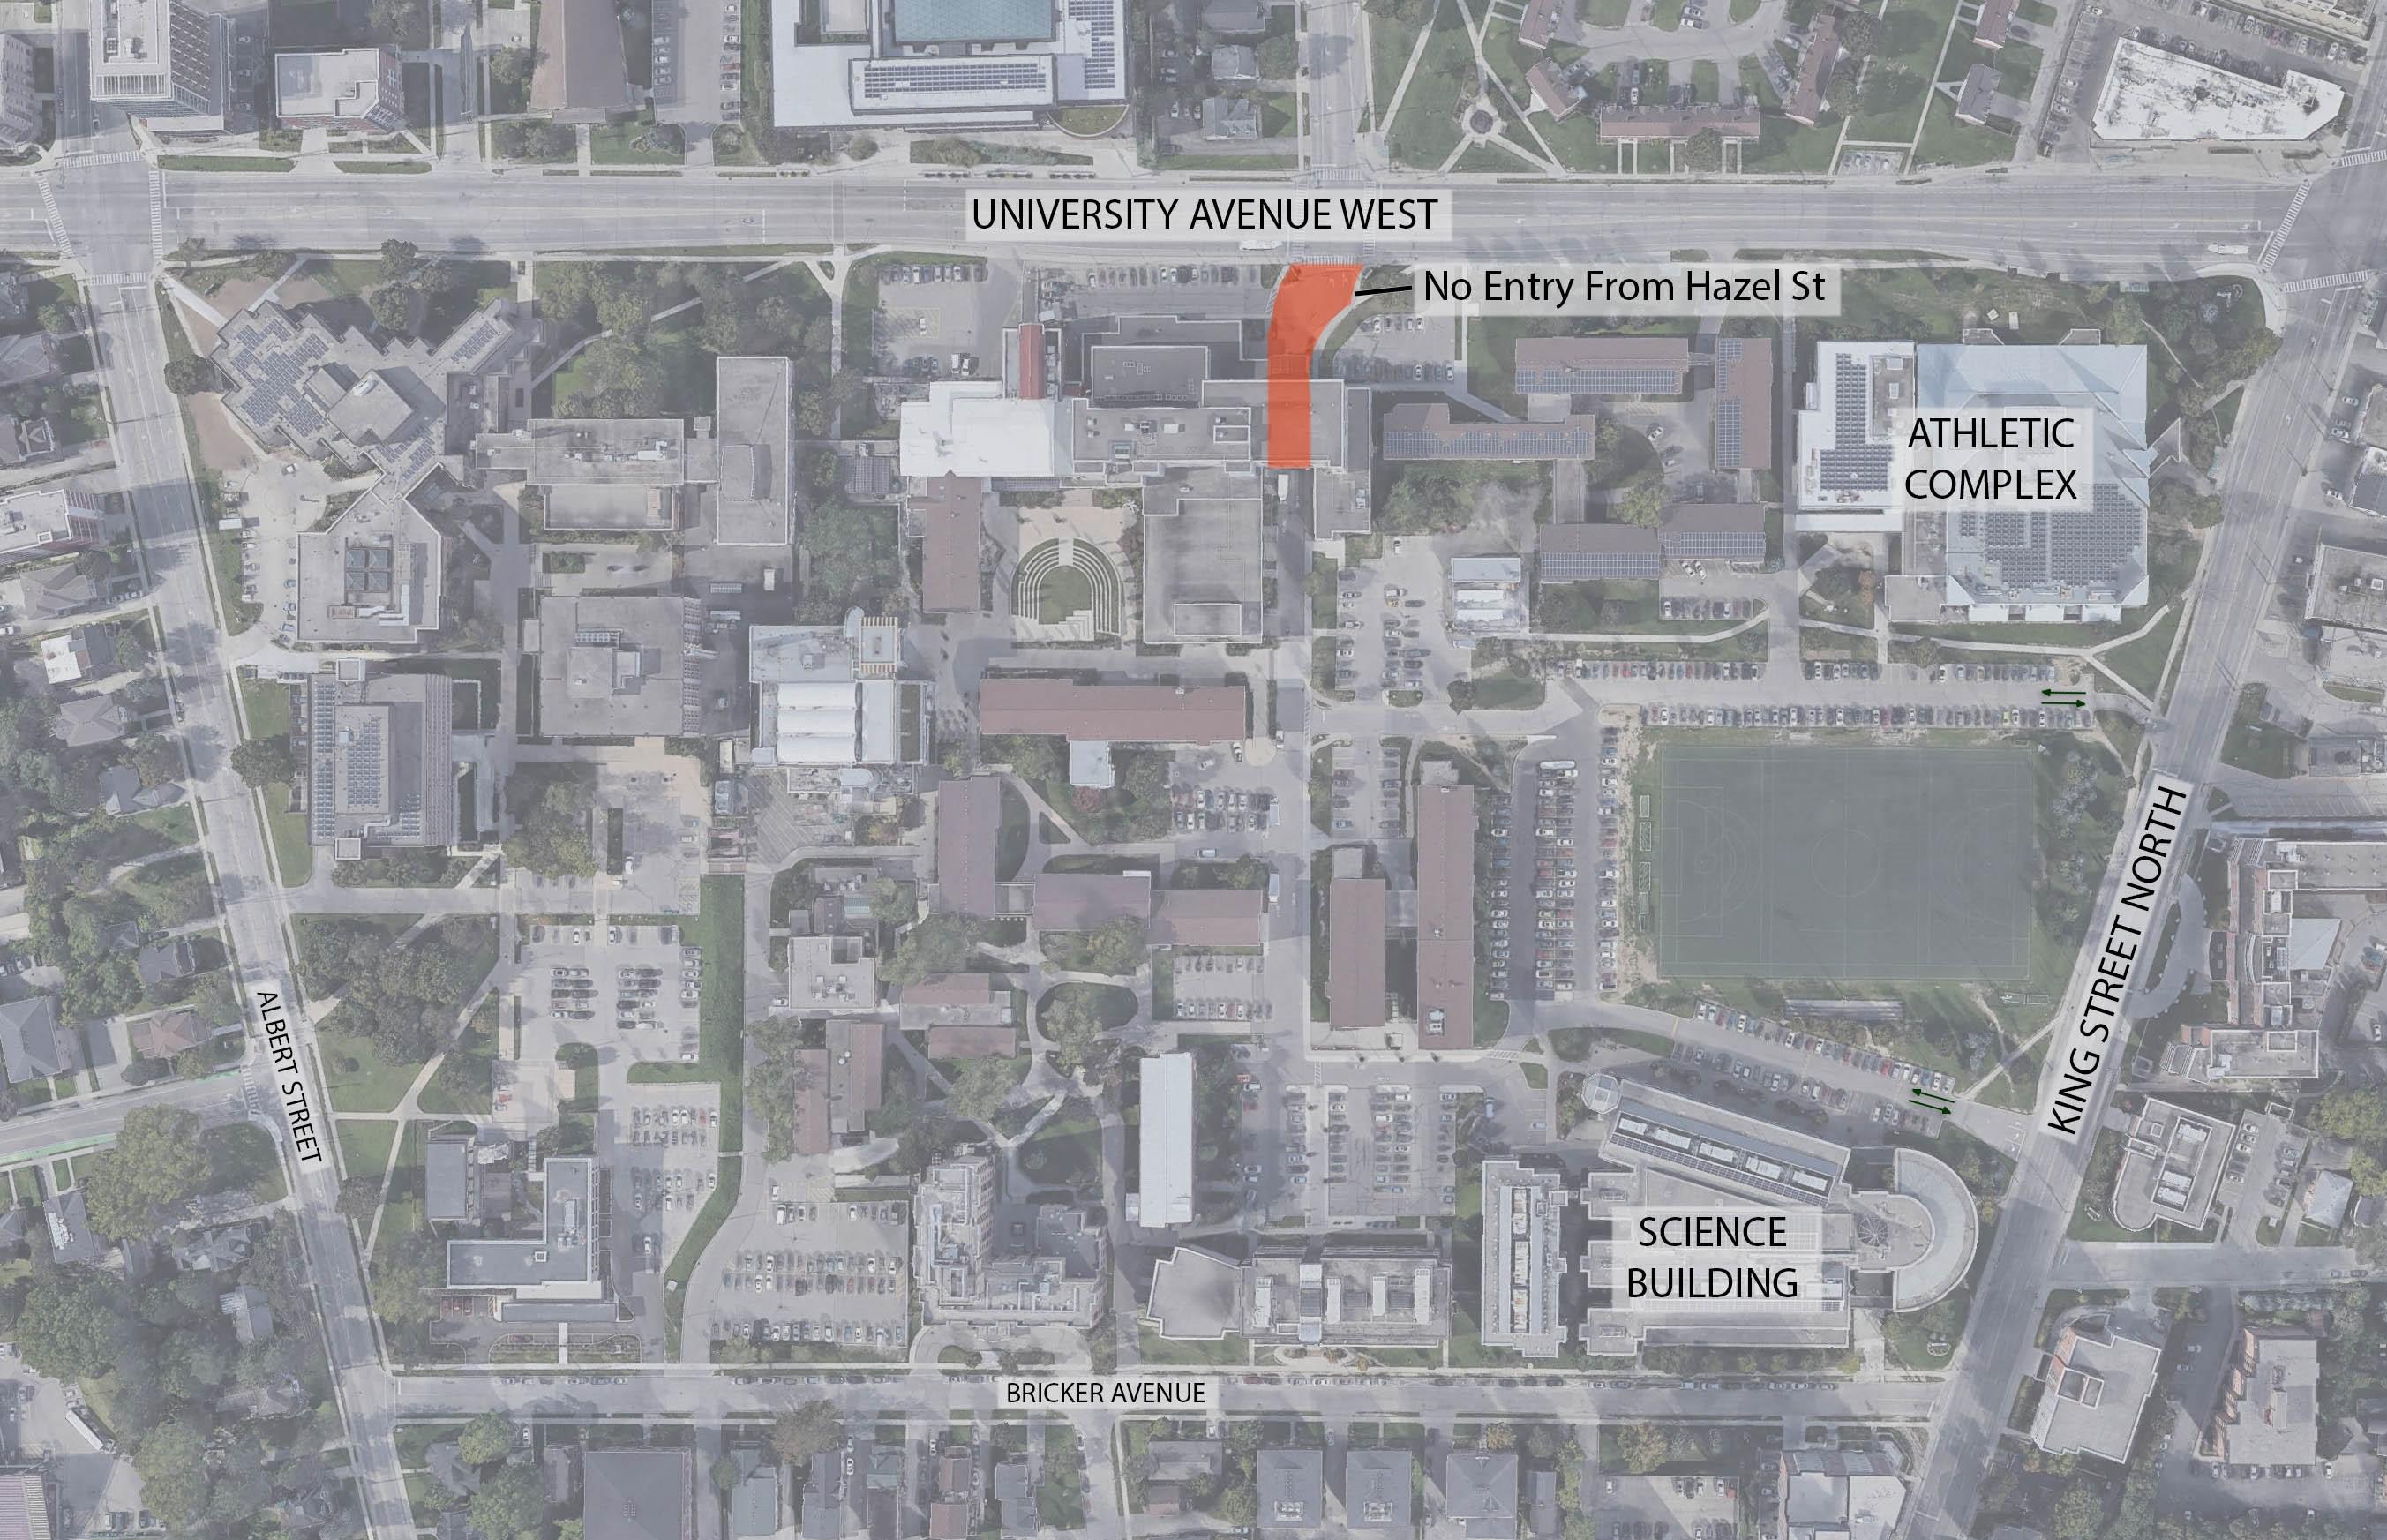 map-displaying-closure-of-university-avenue-west-campus-entrance-and-alternate-king-street-north-entrance-by-science-building